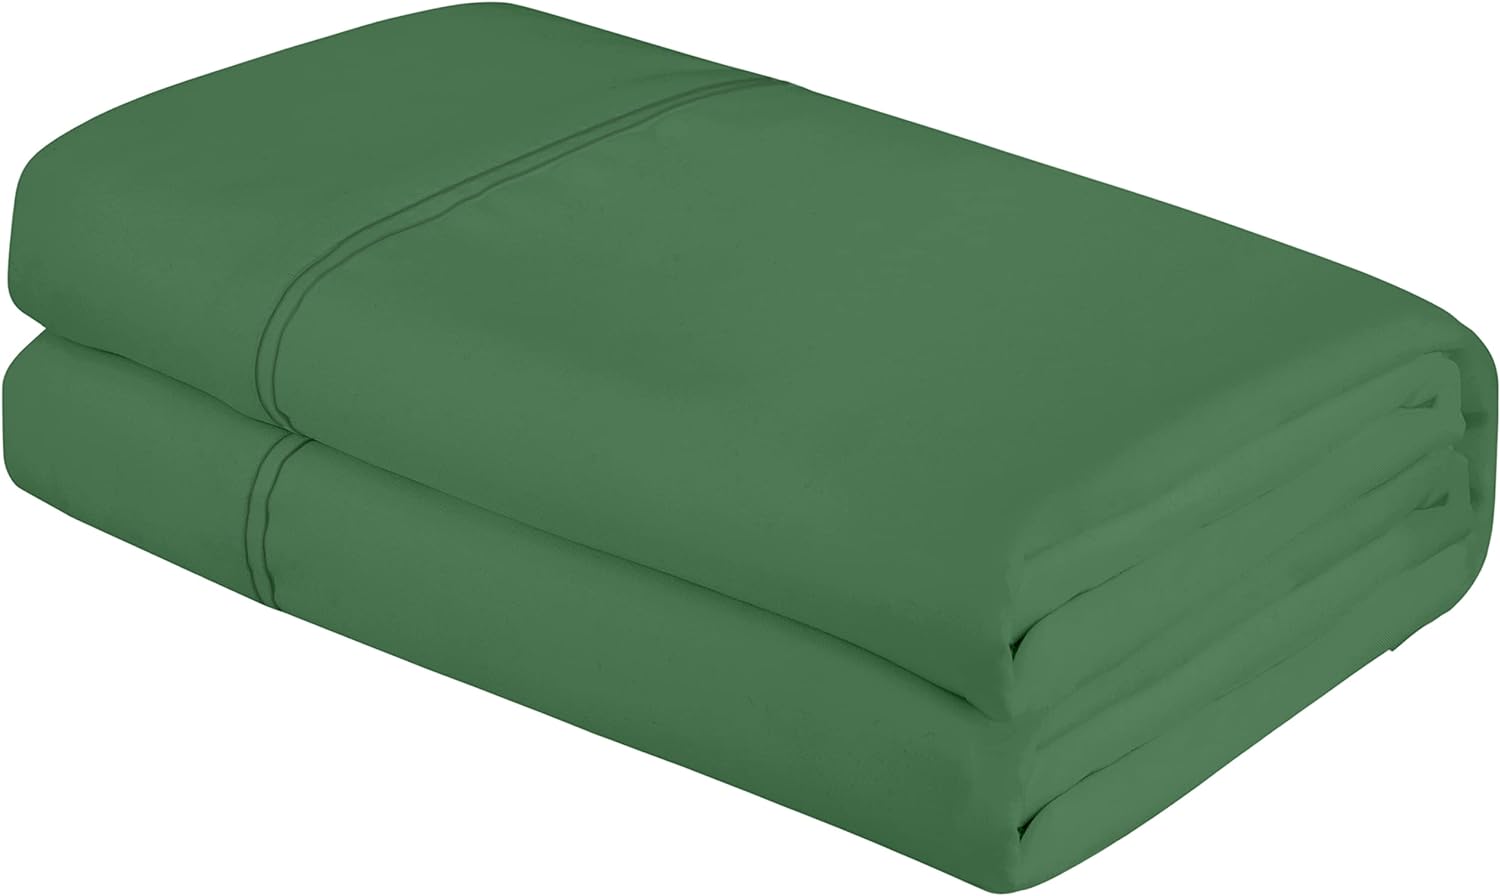 Royale Linens Full Size Flat Sheet Only - Brushed 1800 Microfiber - Ultra Soft & Breathable - Wrinkle Resistant - Hotel Quality Flat Sheet Sold Separately - Top Sheet for Bed - (Full, Hunter Green)